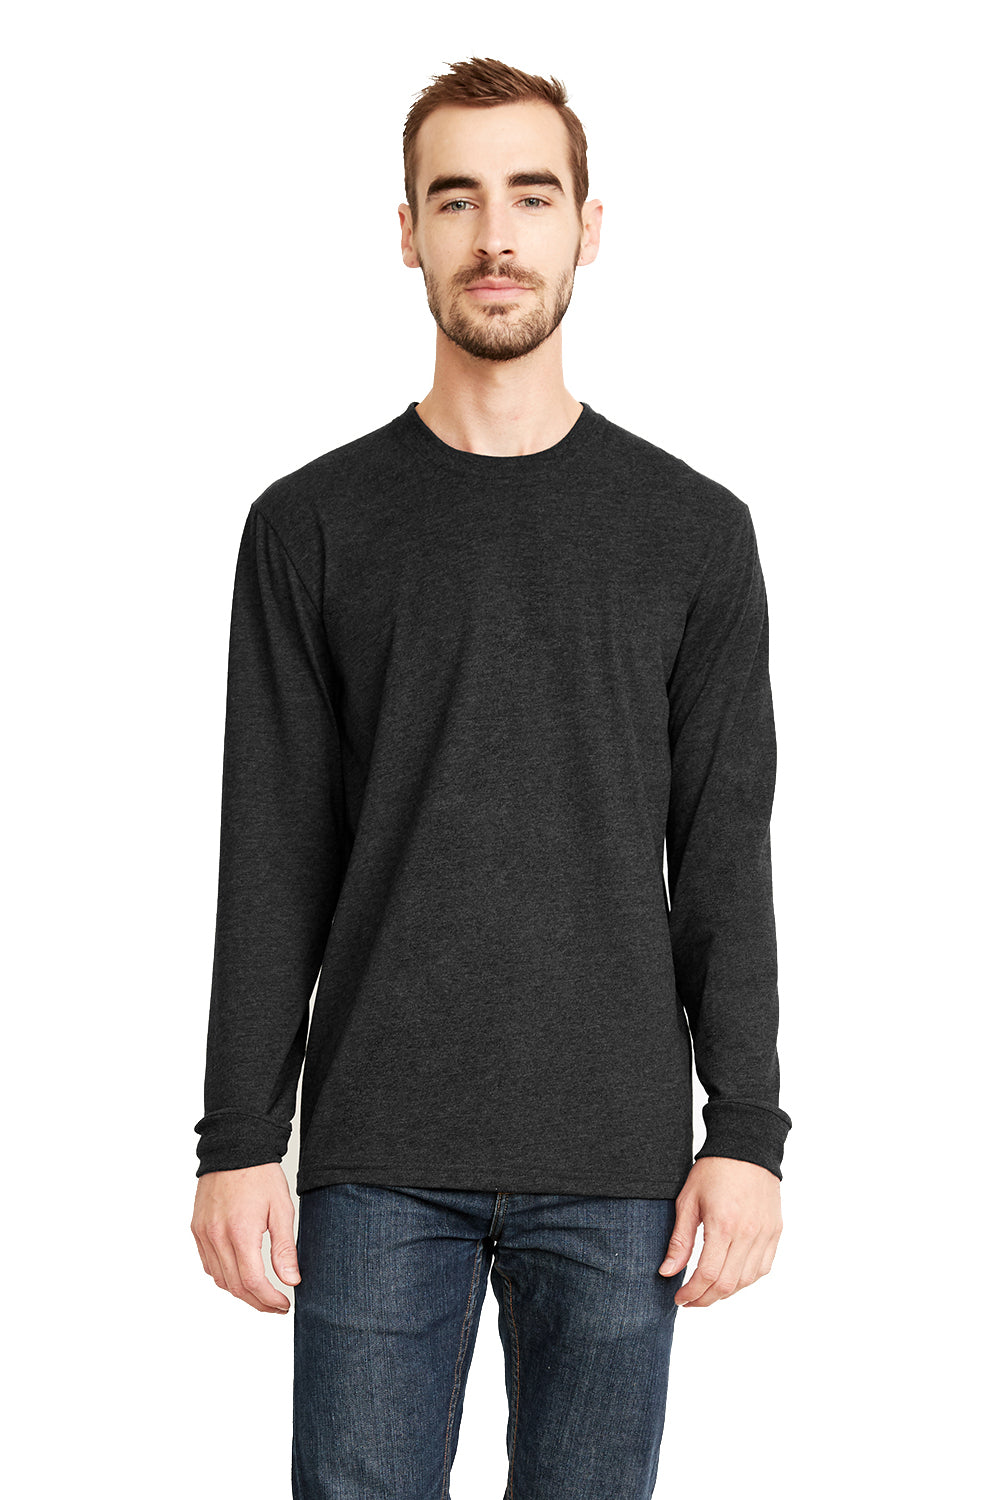 Next Level 6411 Mens Sueded Jersey Long Sleeve Crewneck T-Shirt Heather Charcoal Grey Front